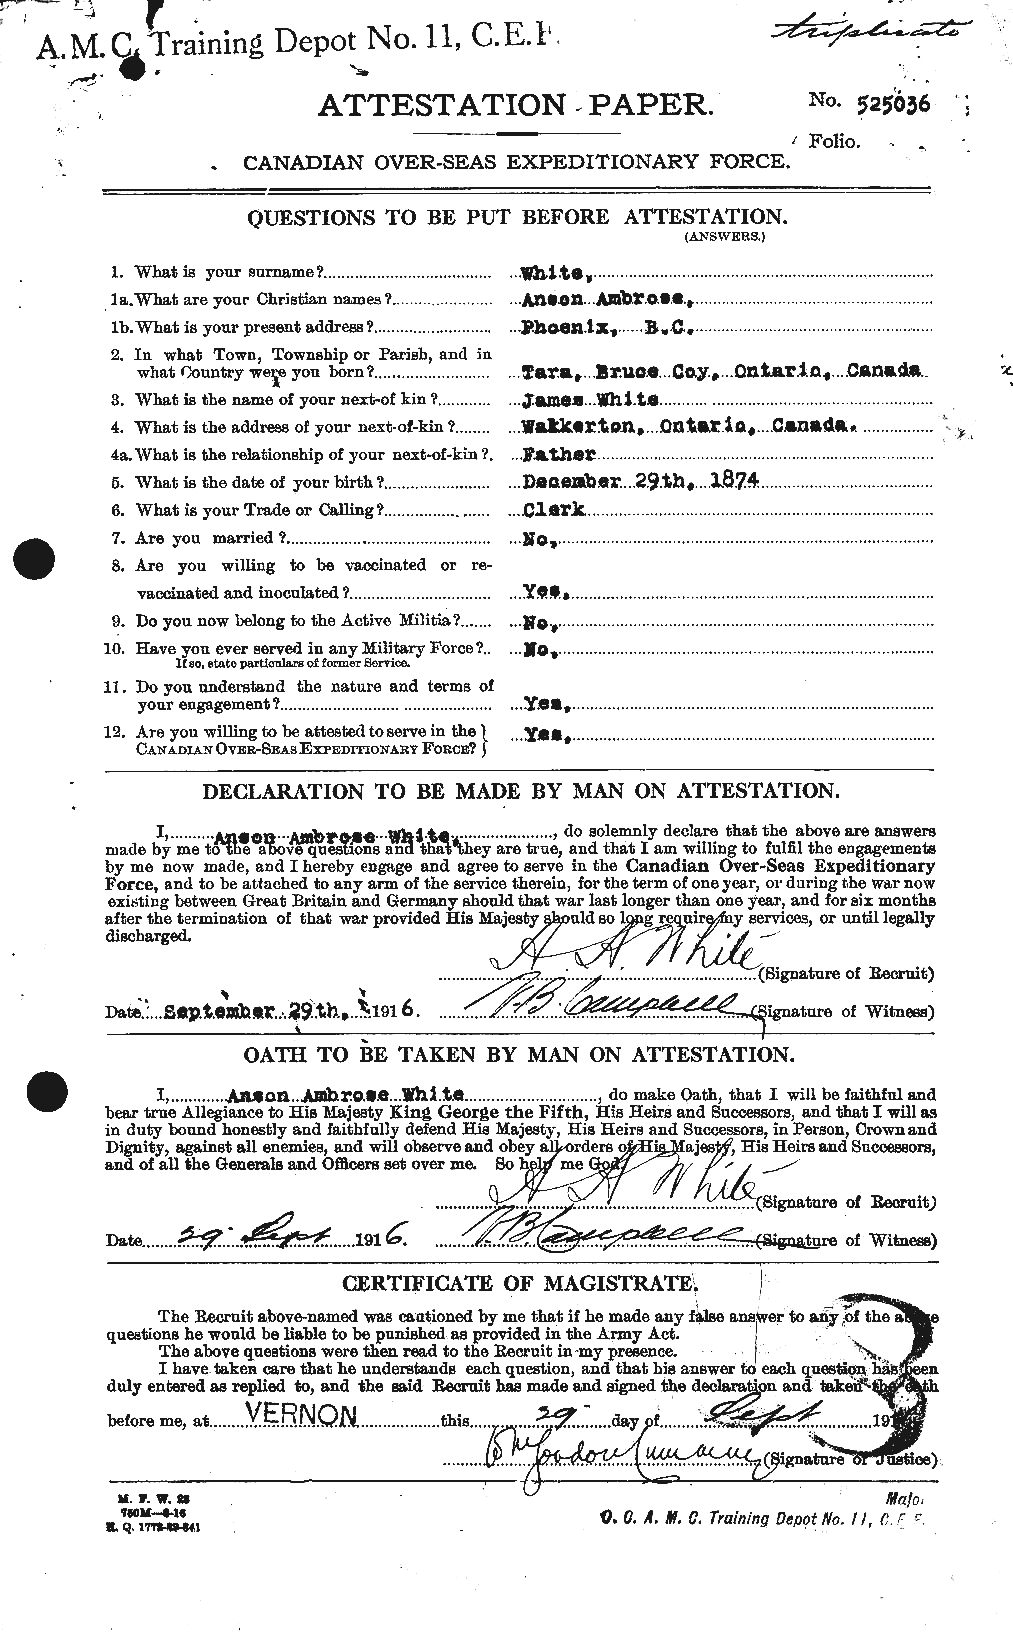 Personnel Records of the First World War - CEF 669811a